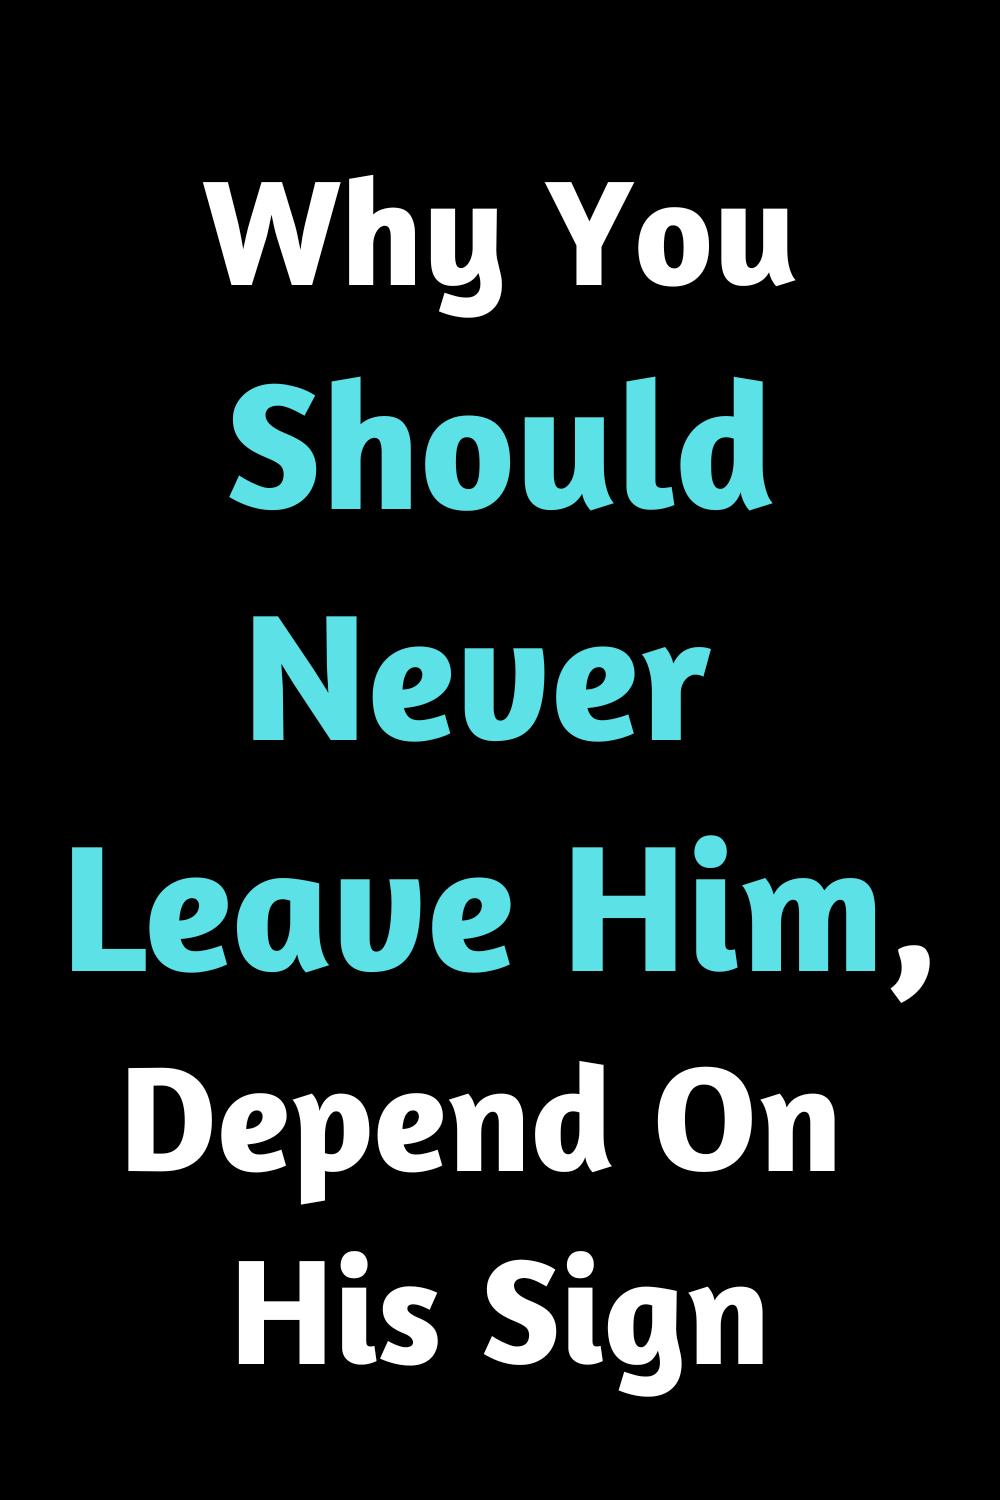 Why You Should Never Leave Him, Depend On His Sign